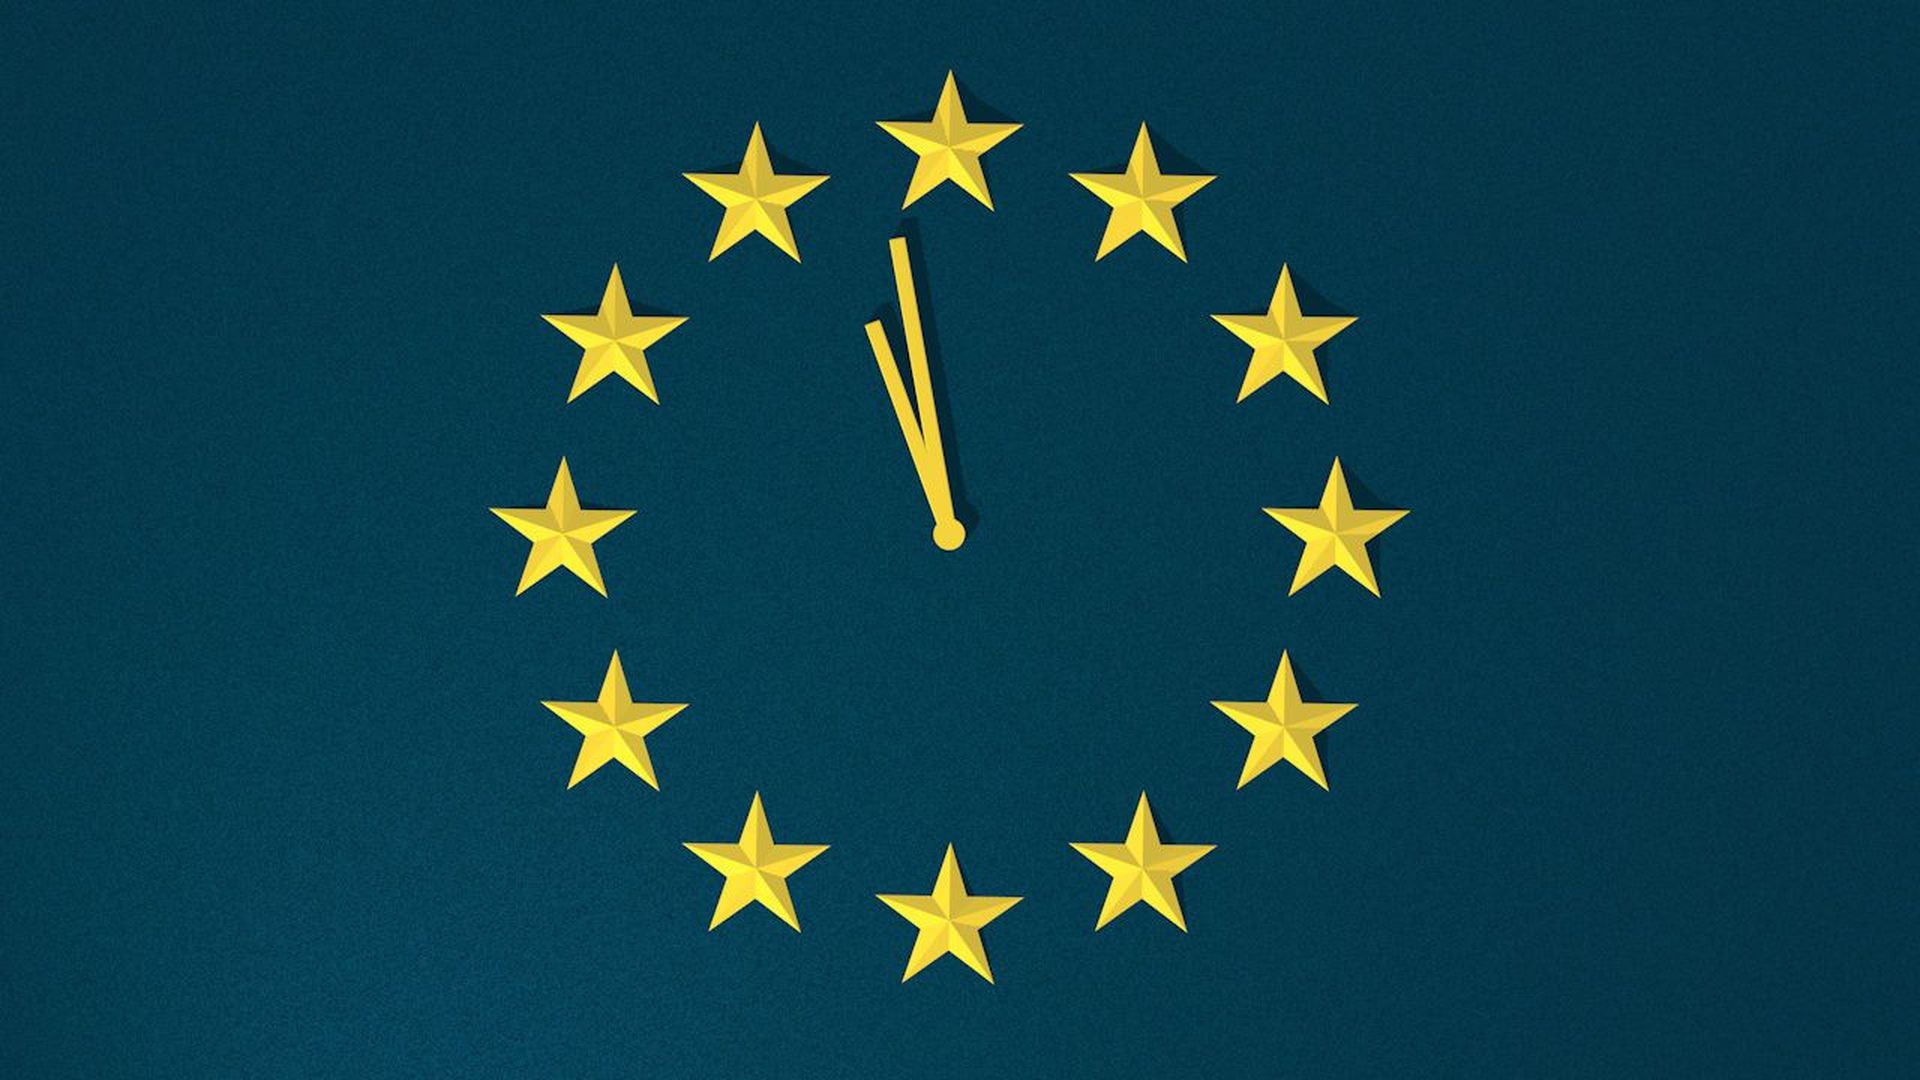 Illustration of the stars of the European Union flag forming a clock, with the time approaching midnight.